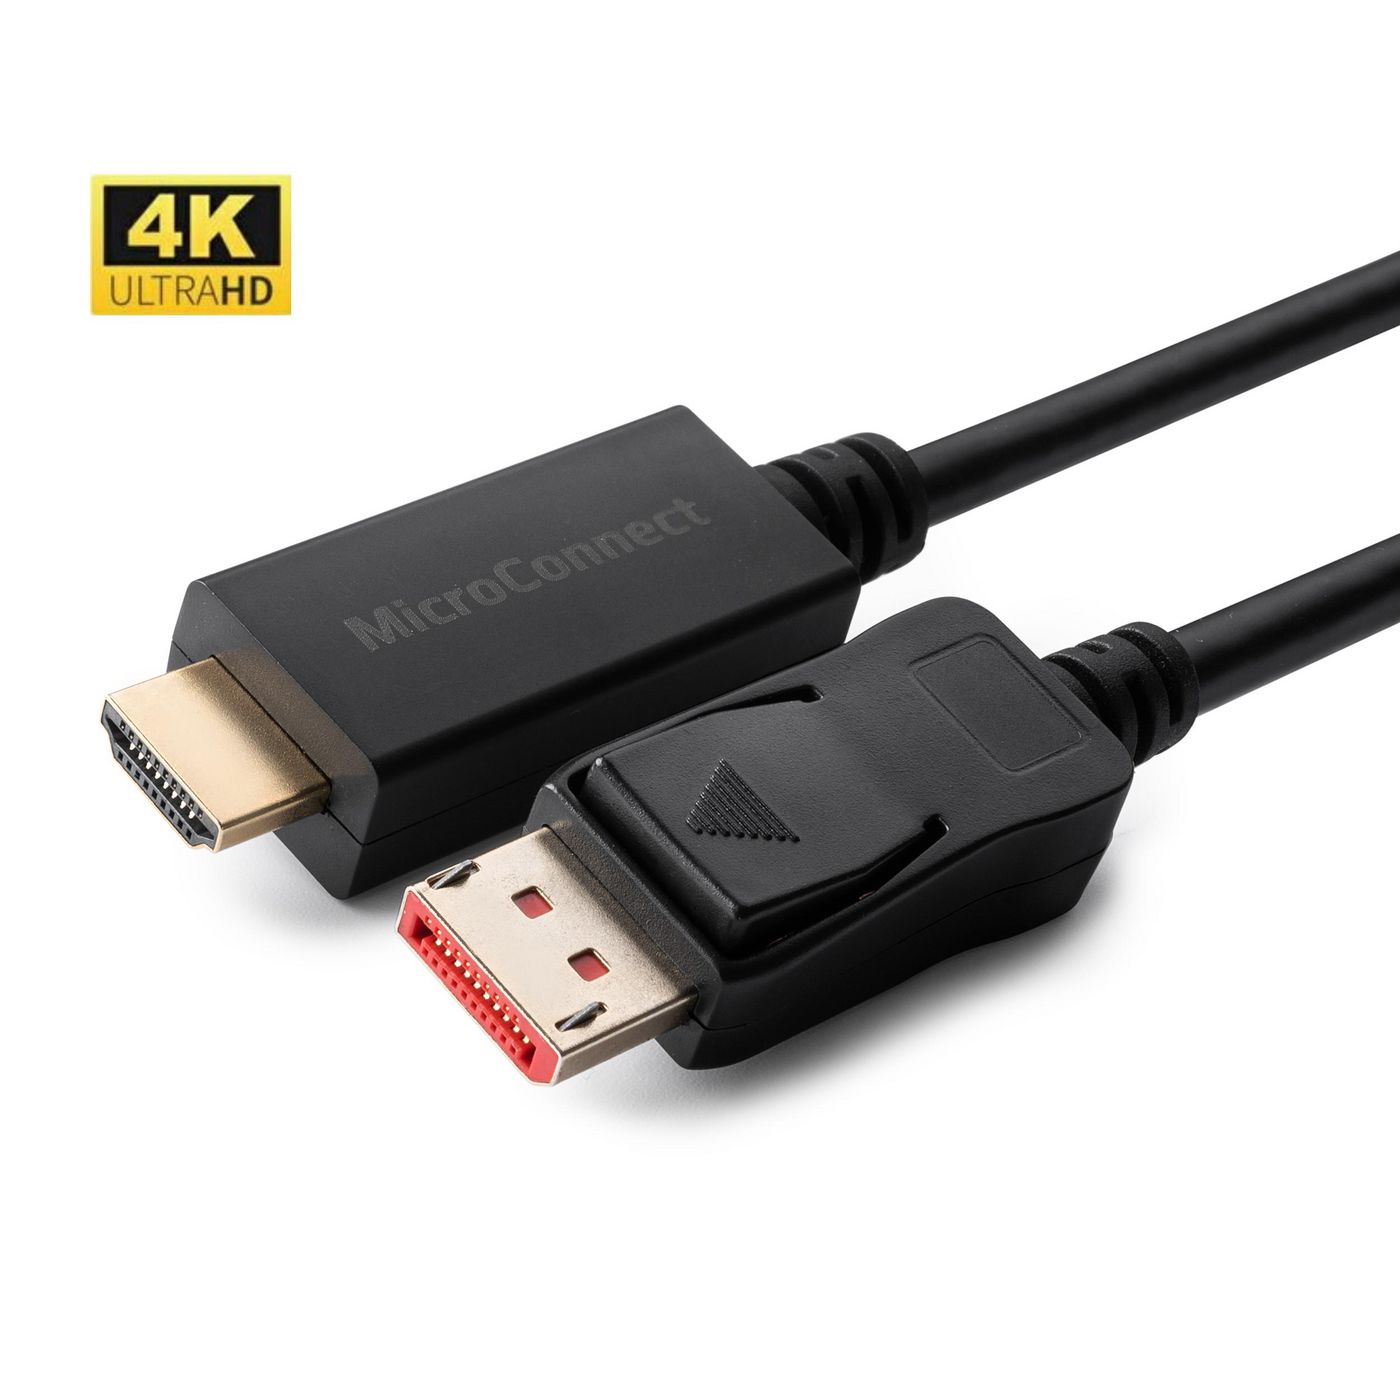 DisplayPort To Hdmi Cable 4k Supports 4k*2k@60hz And 3d - 3m